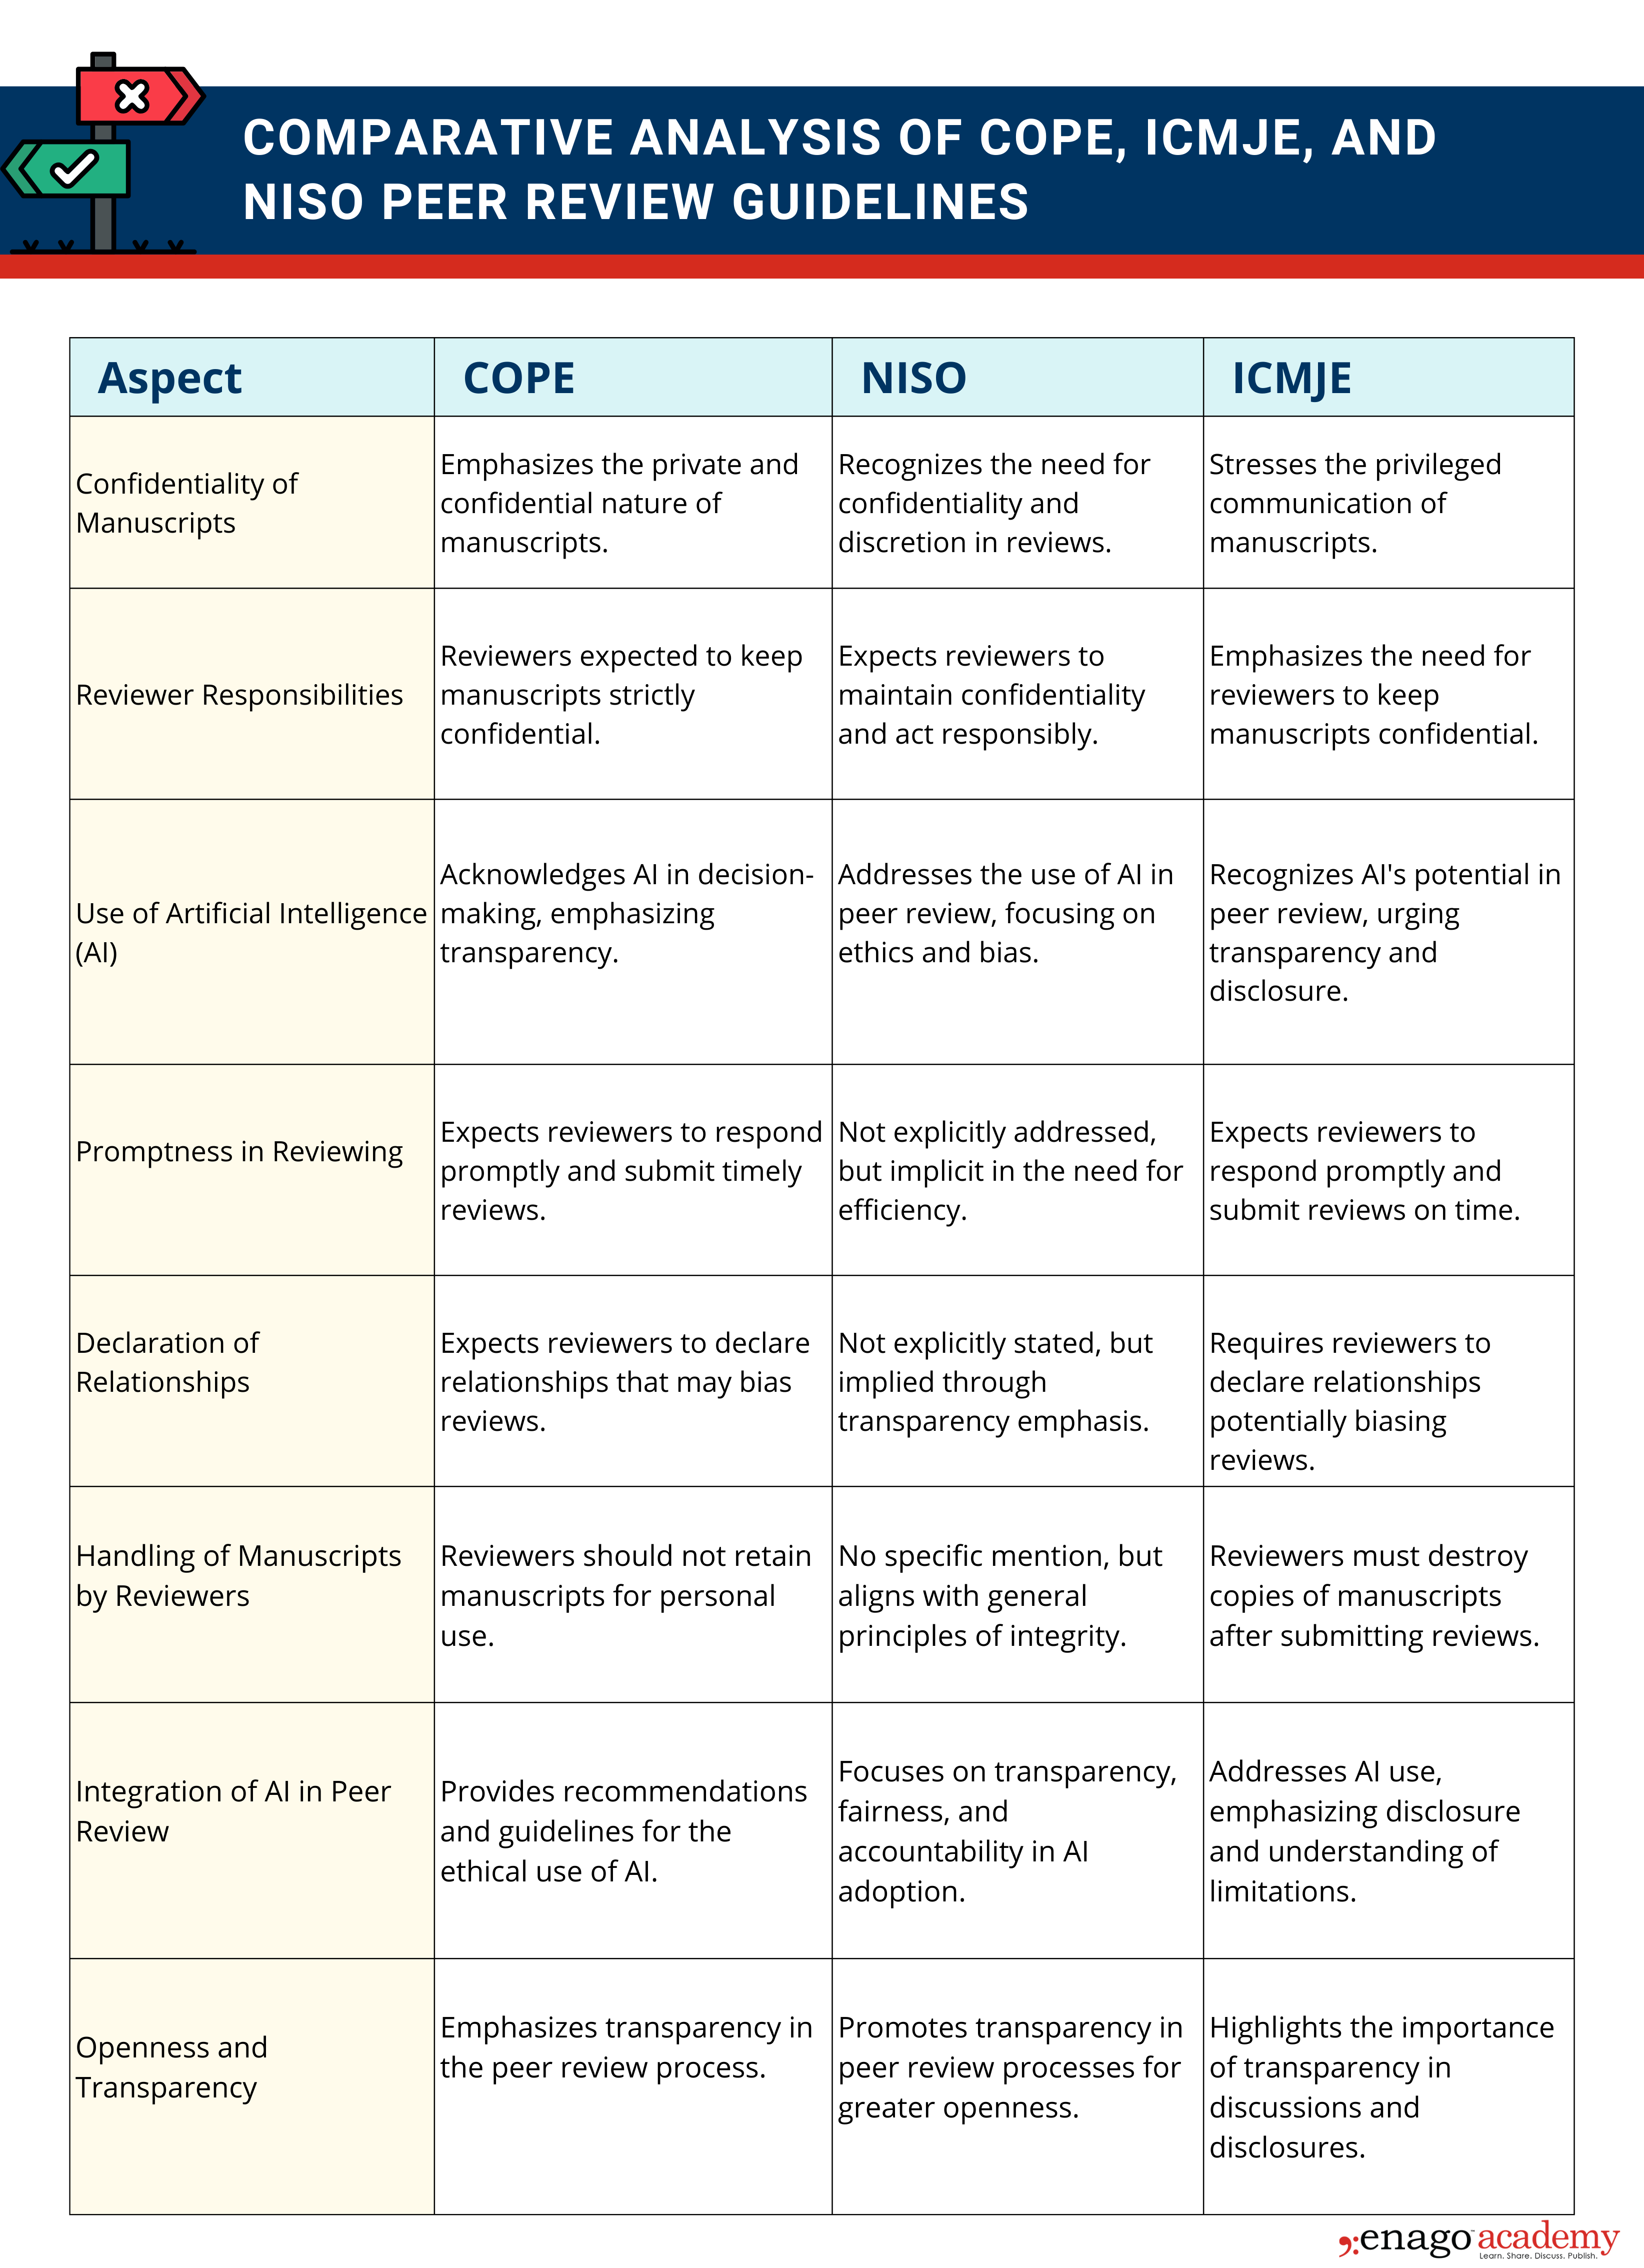 Comparative Analysis of Peer Reviewer Guidelines